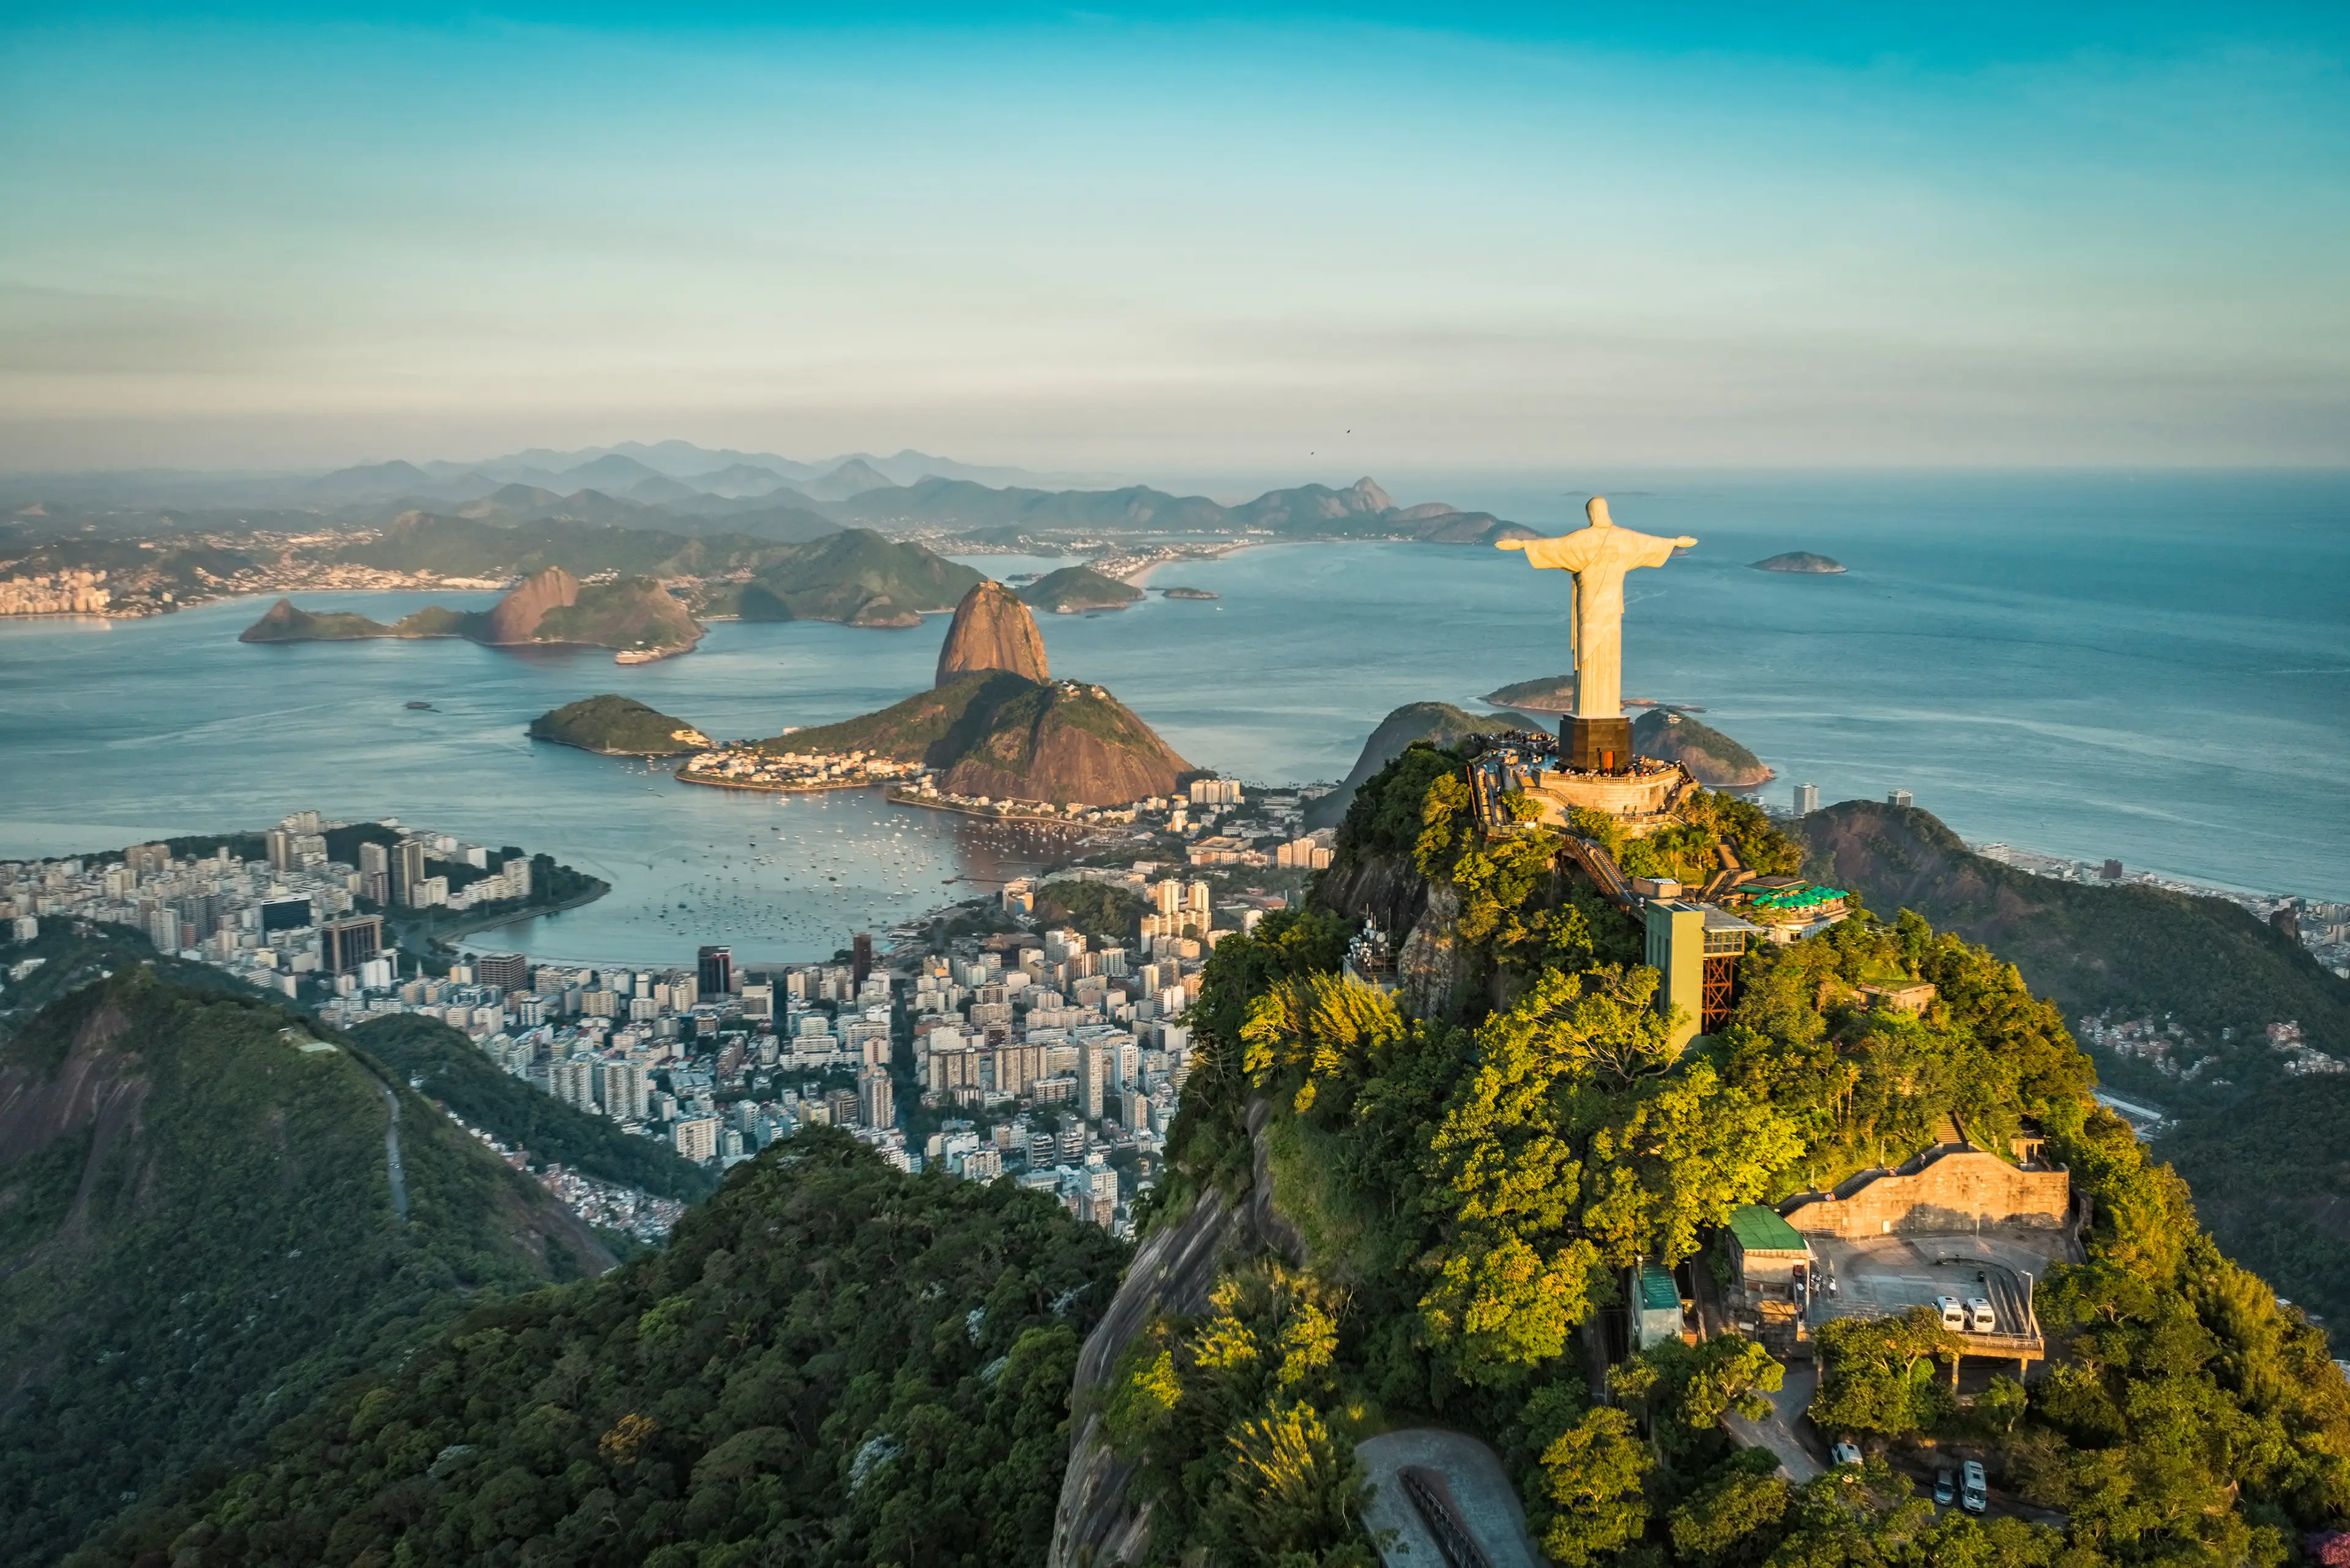 Aerial view of Christ the Redeemer and Botafogo Bay in Rio de Janeiro from a high angle.